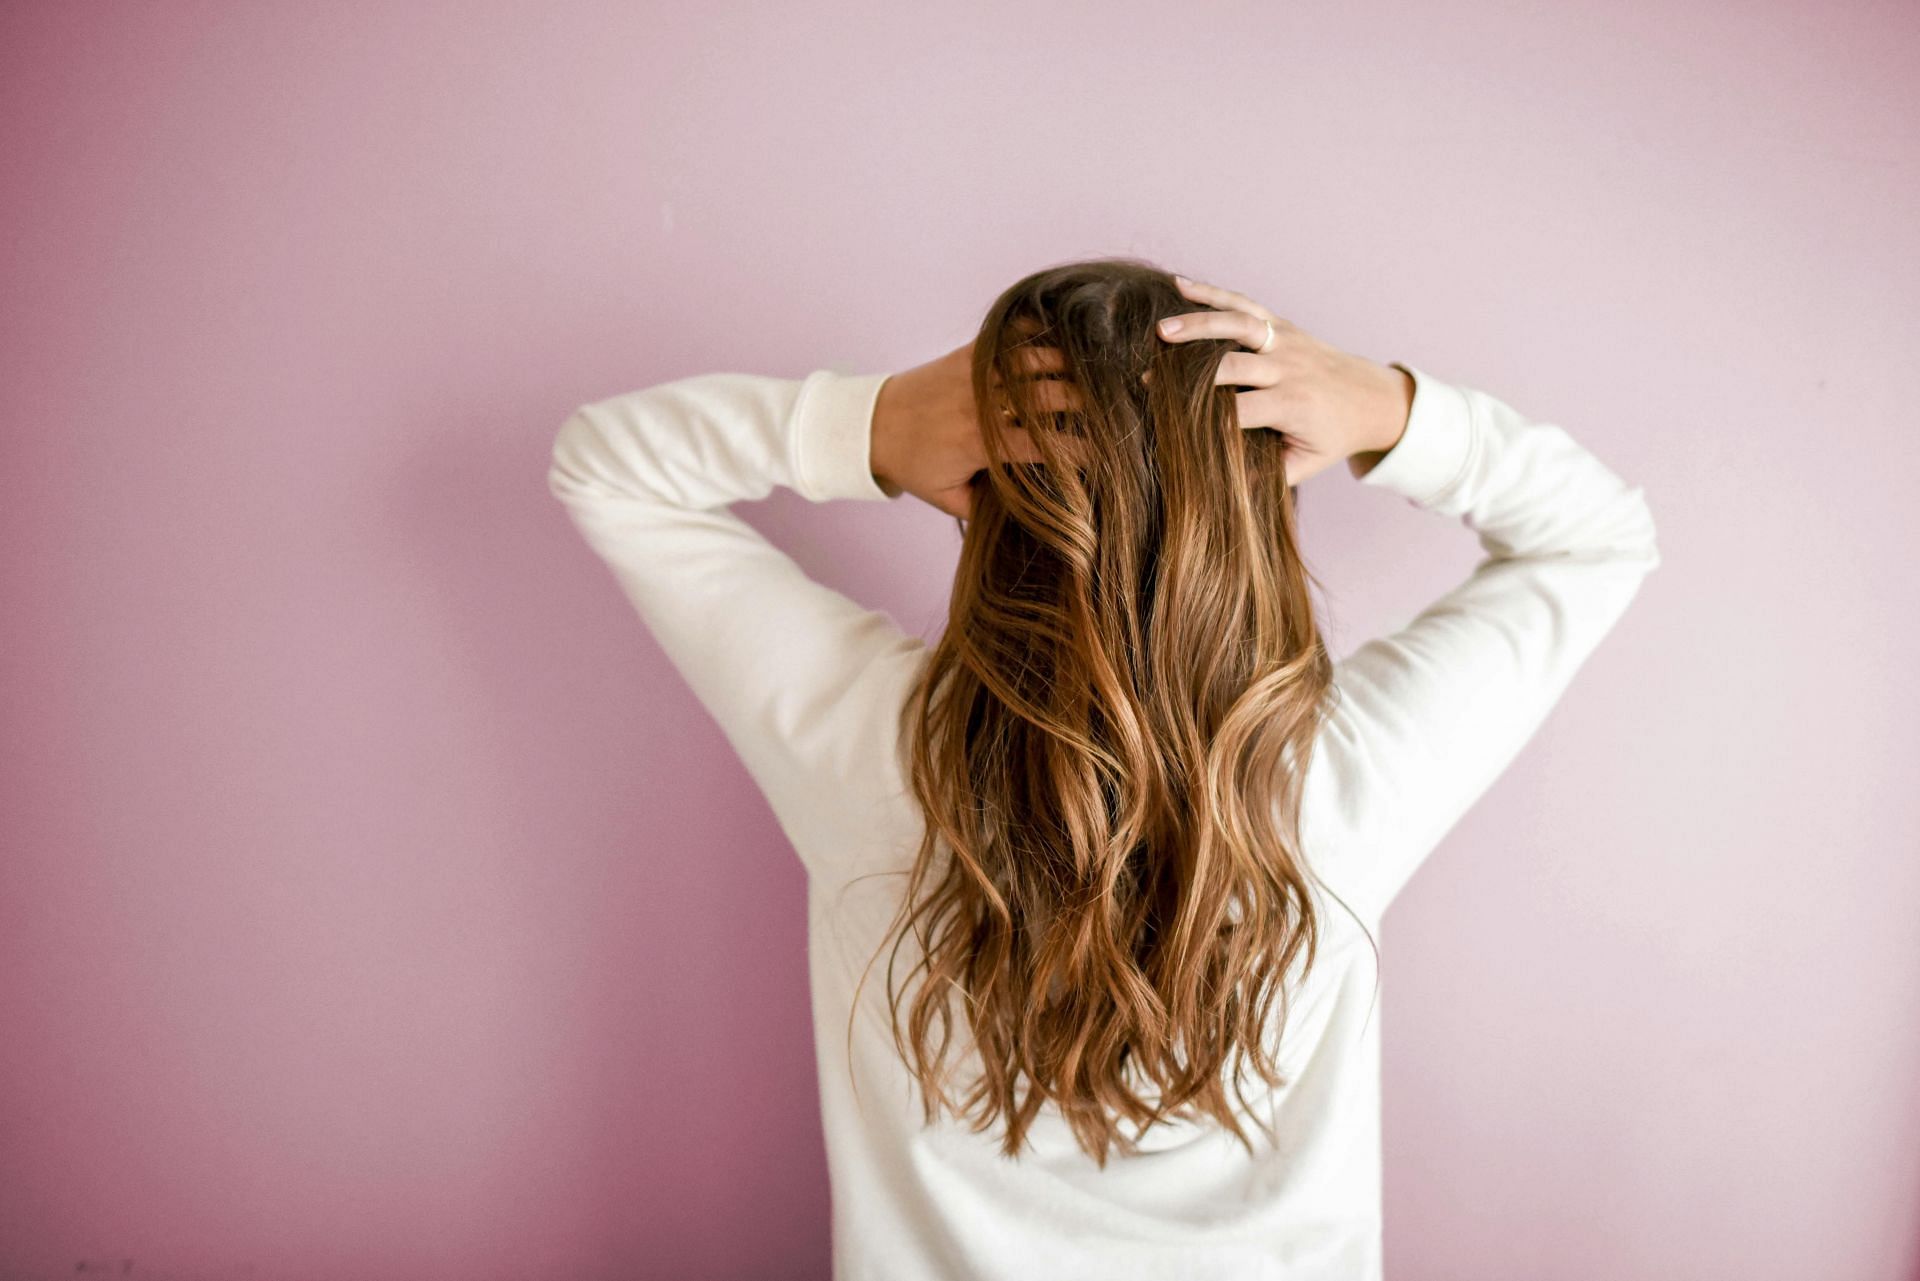 home remedies to treat oily scalp (Image sourced via Pexels / Photo by Element Digital)